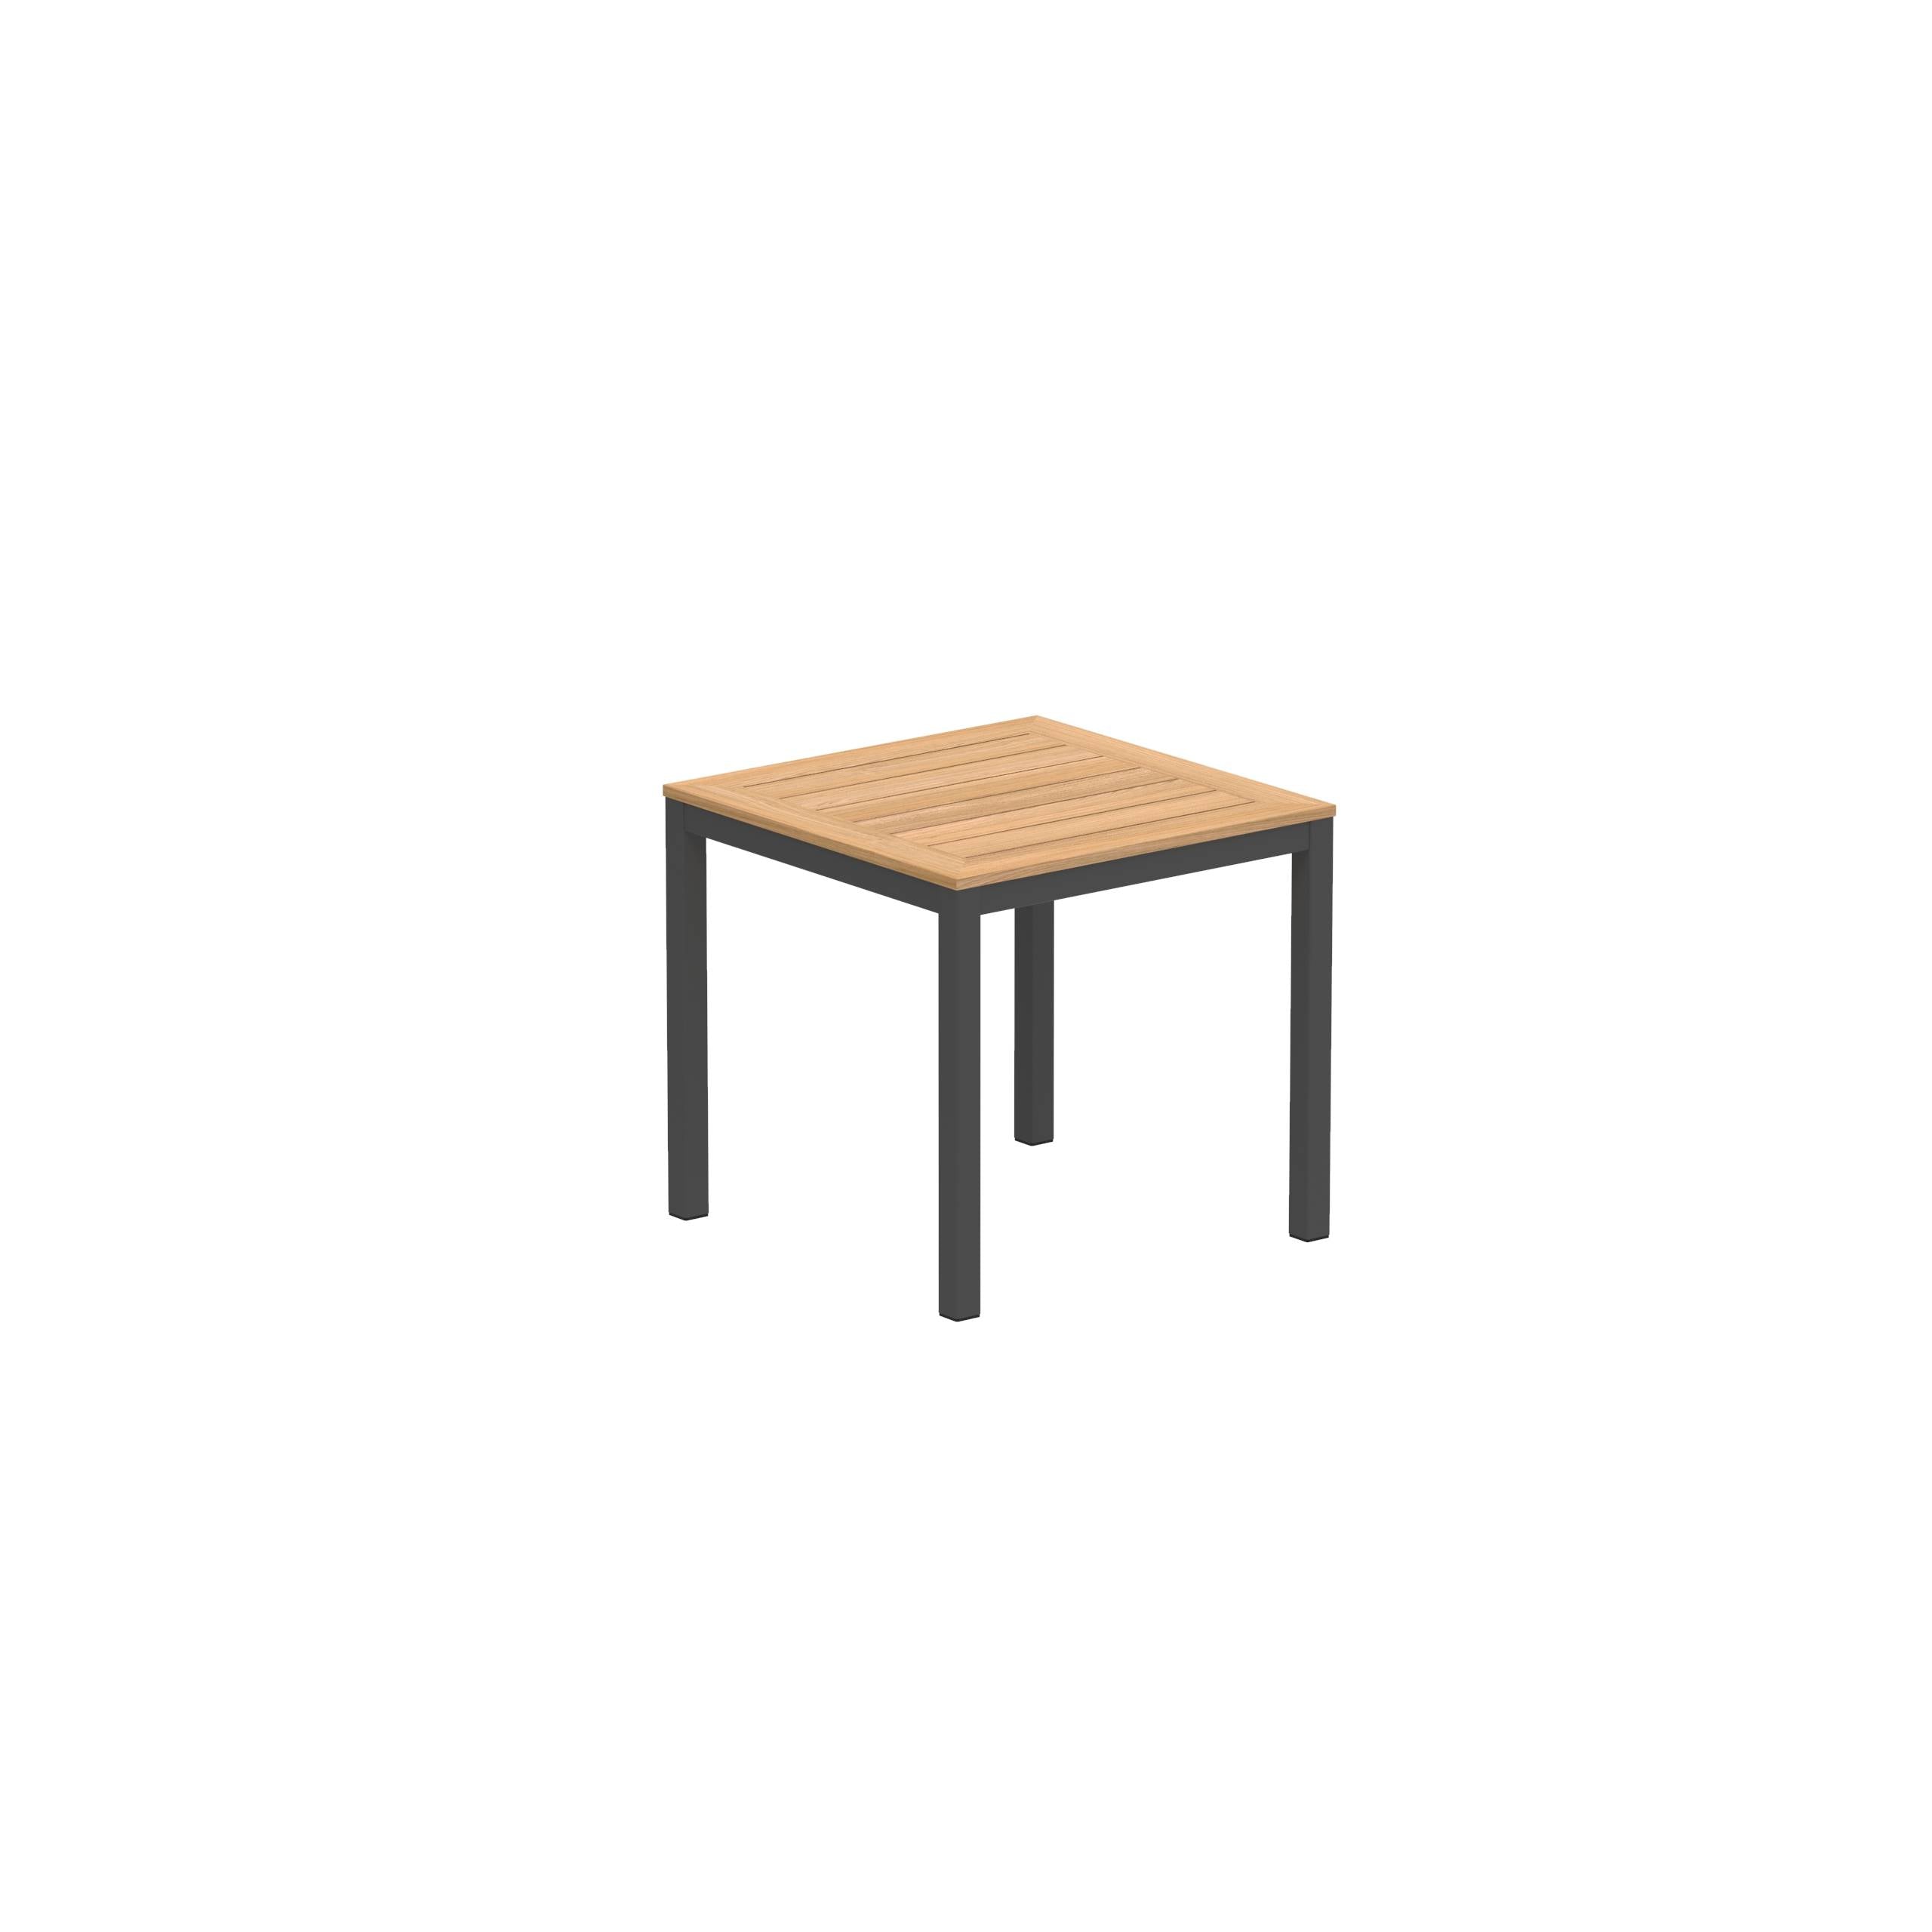 Taboela Table 80x80cm Anthracite With Teak Tabletop